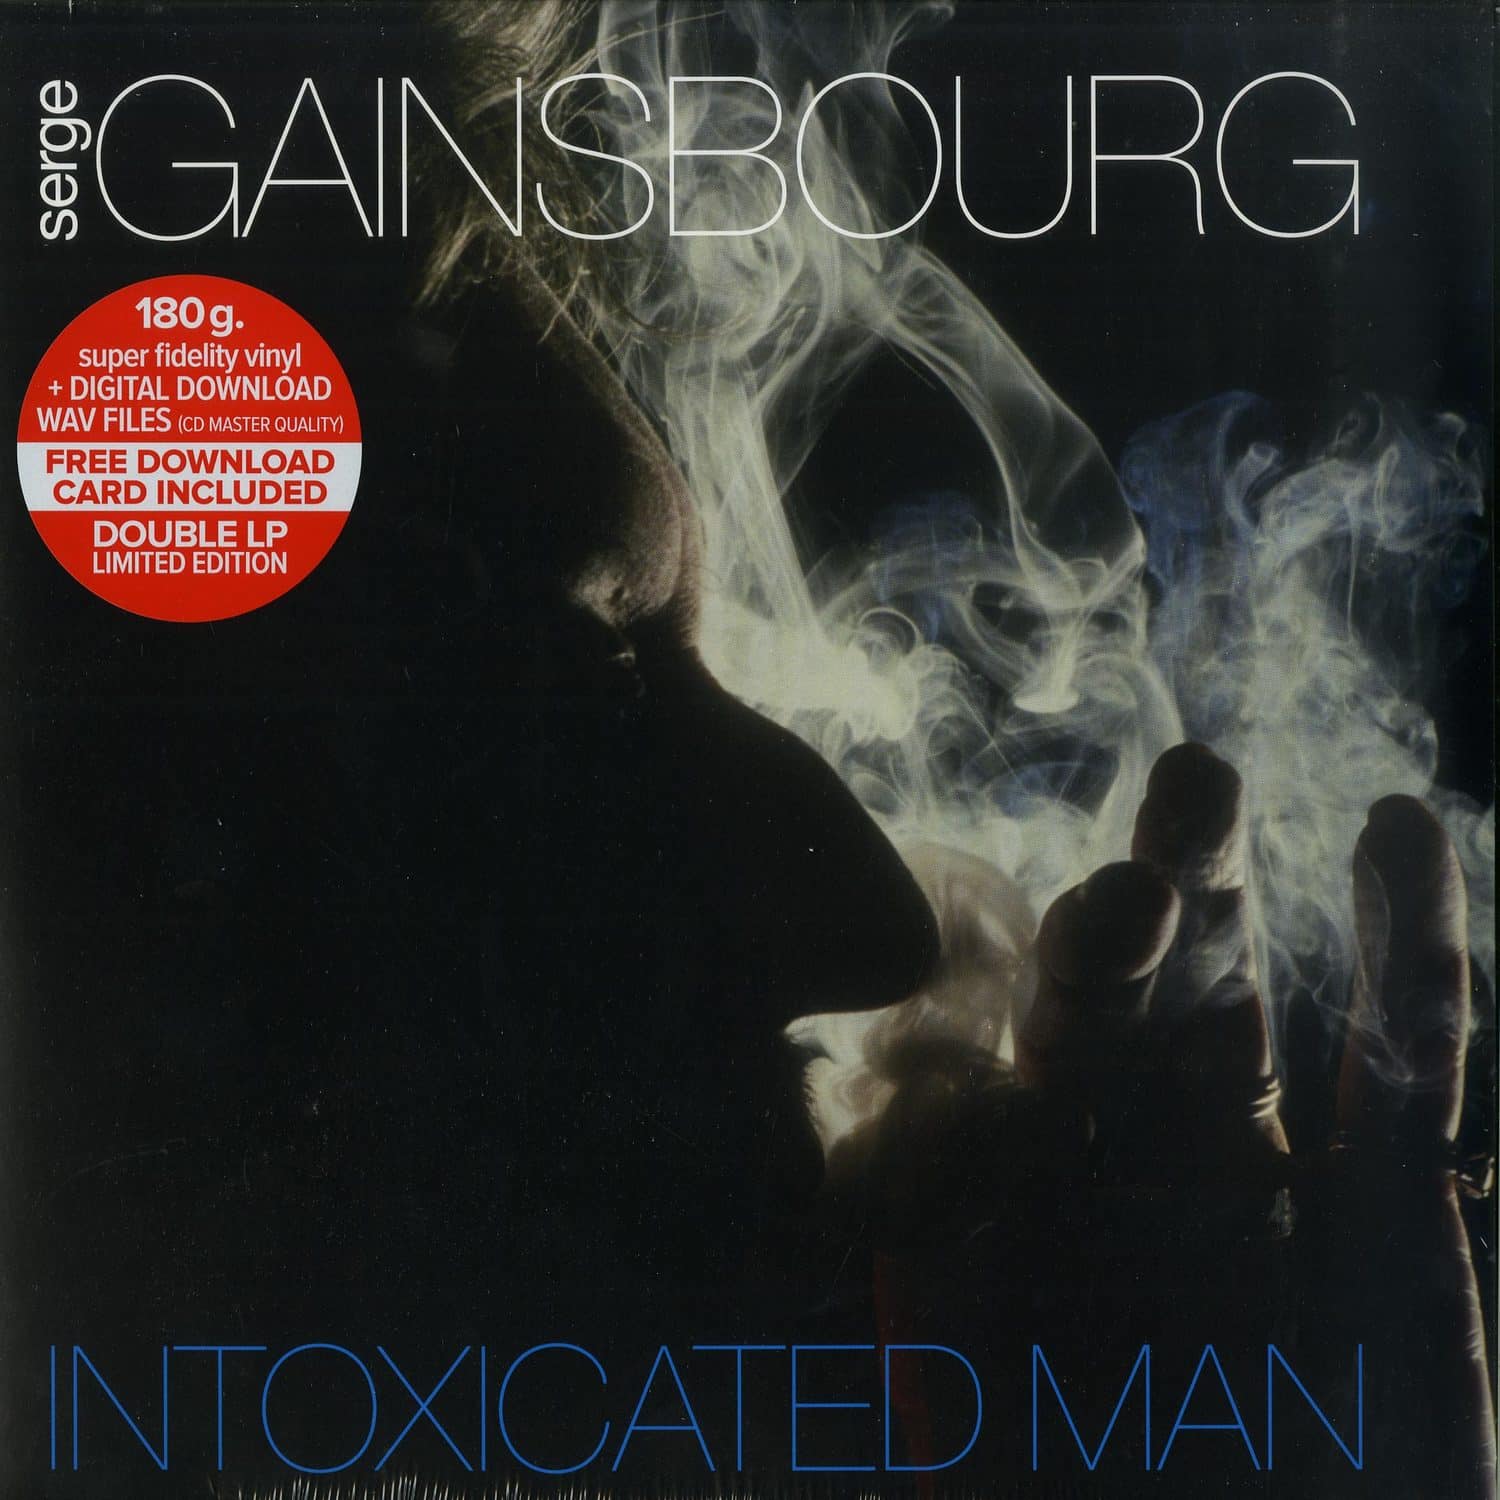 Serge Gainsbourg - INTOXICATED MAN 